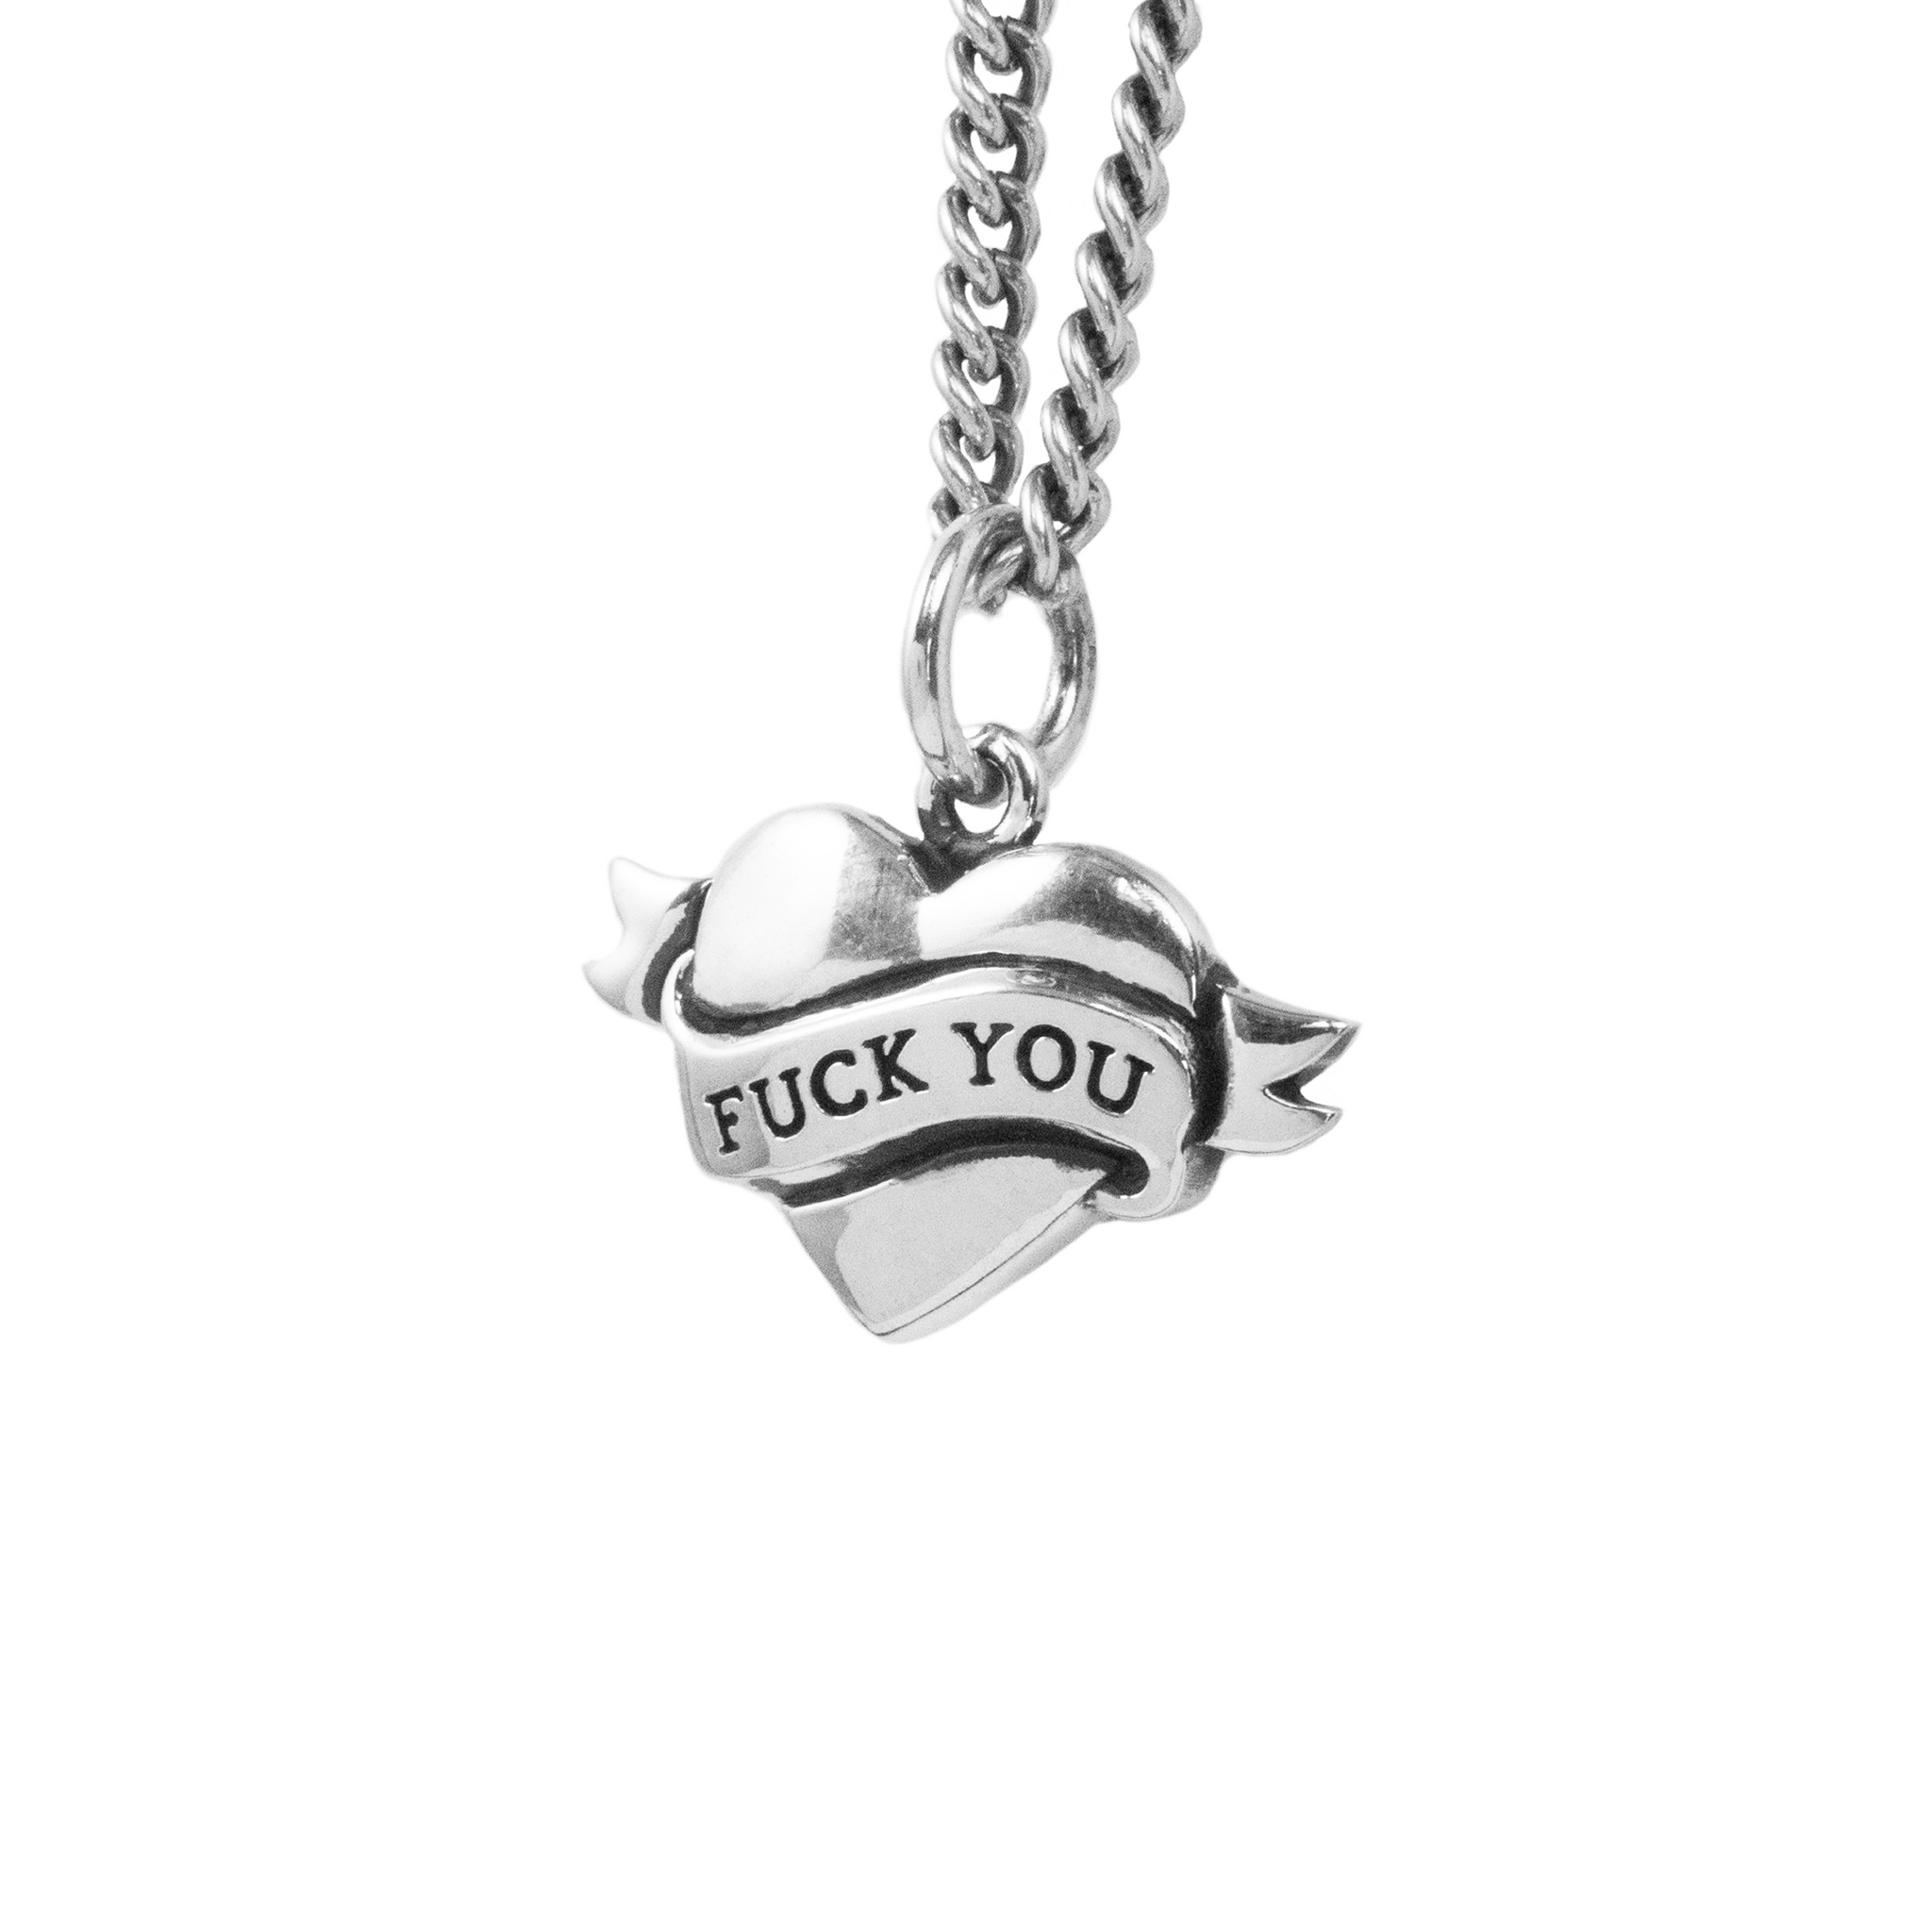 Tattoo Fuck You Heart Pendant on white background close up